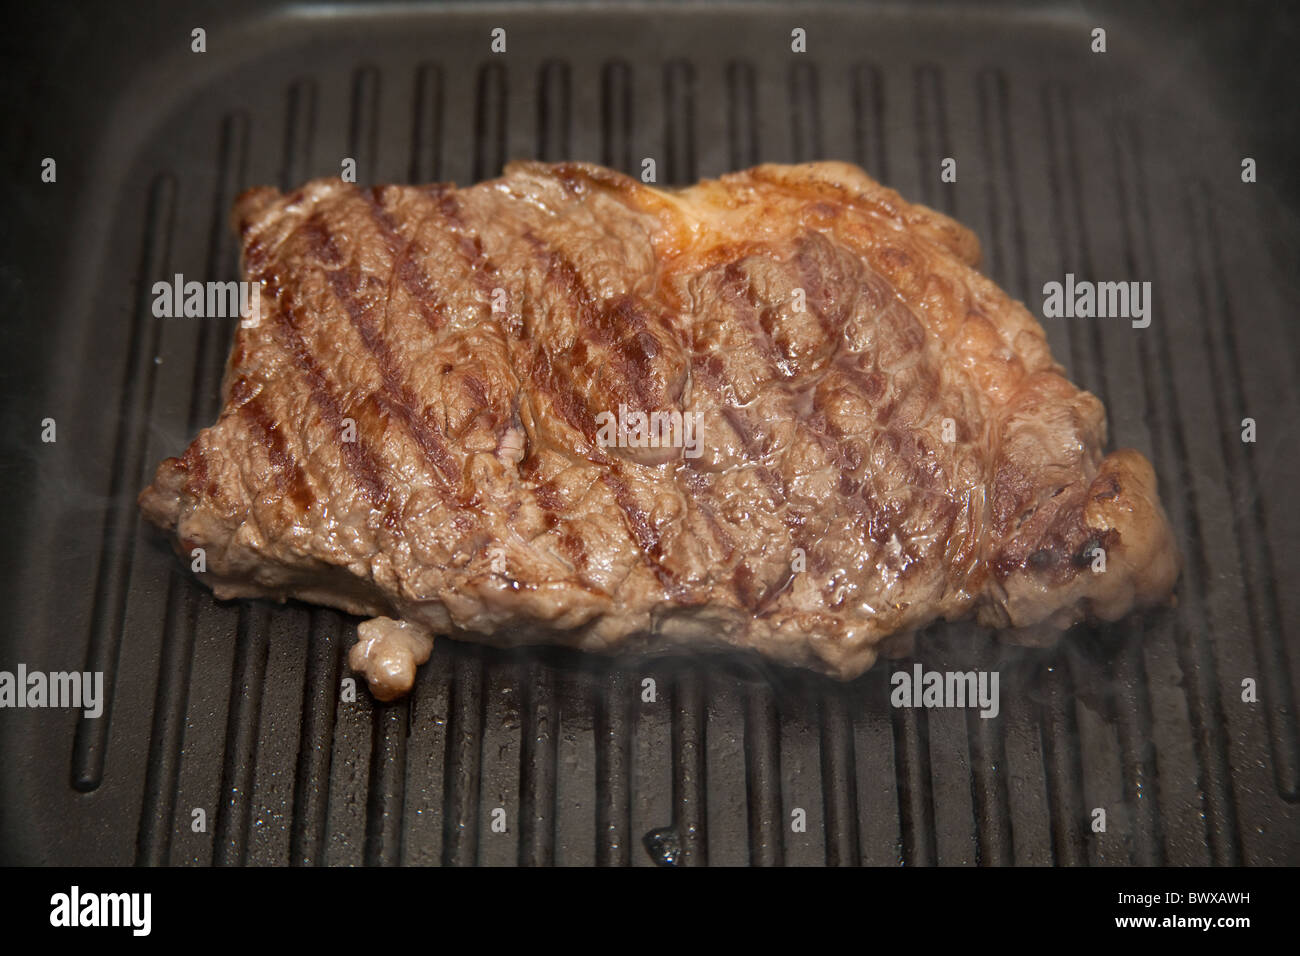 Rump steak being cooked in a griddle pan. Stock Photo